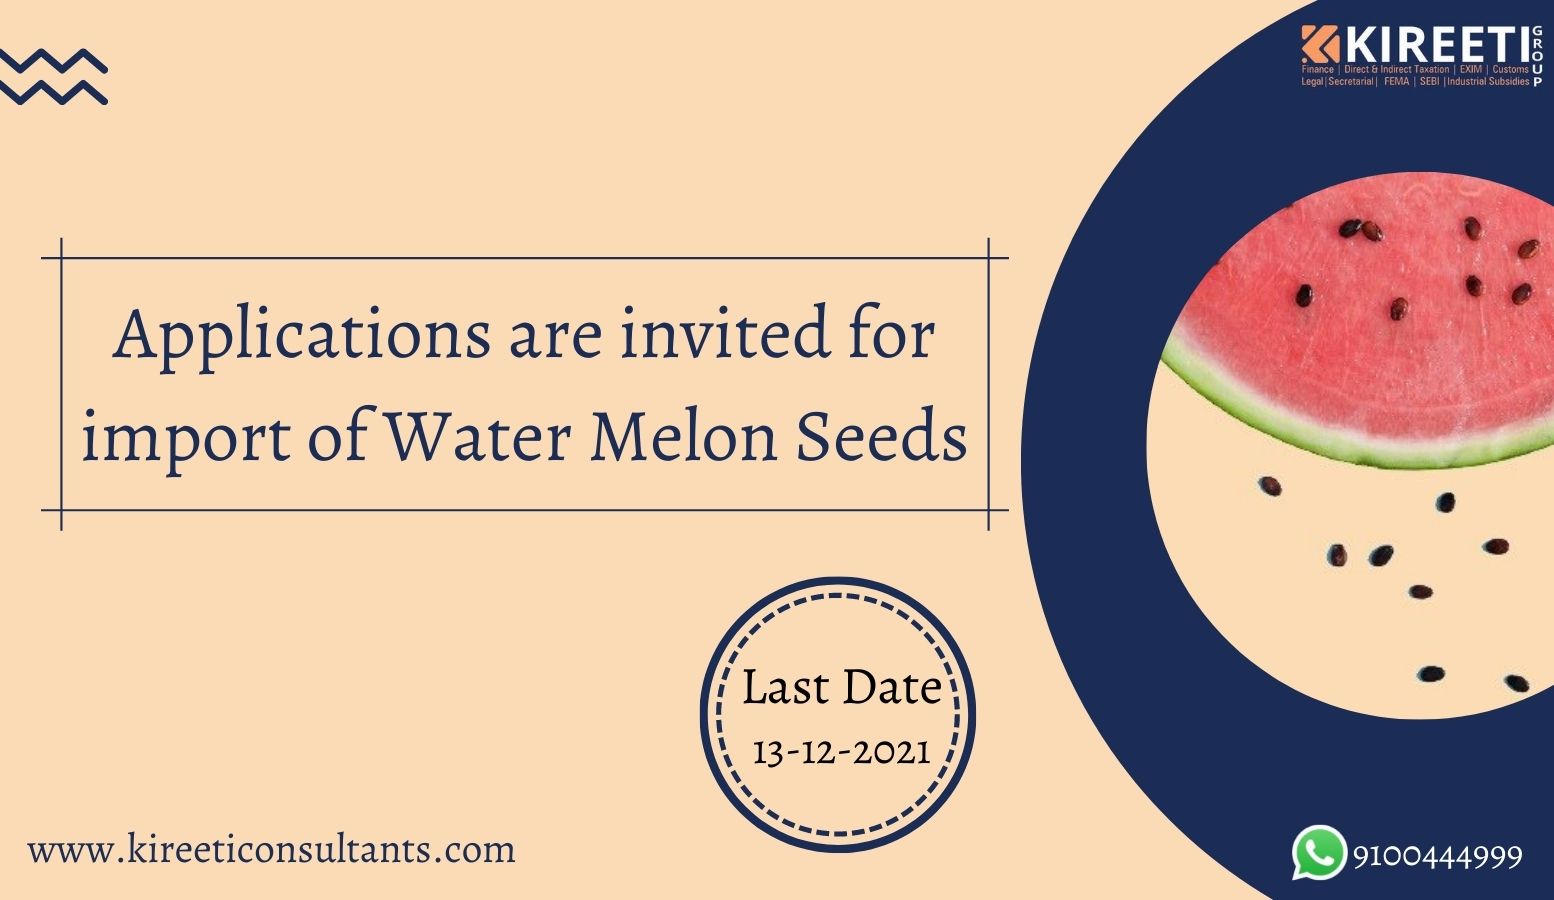 export, import, watermelon, watermelon seeds, import policy, kireeti consultants, kcgroup, public notice, iec,